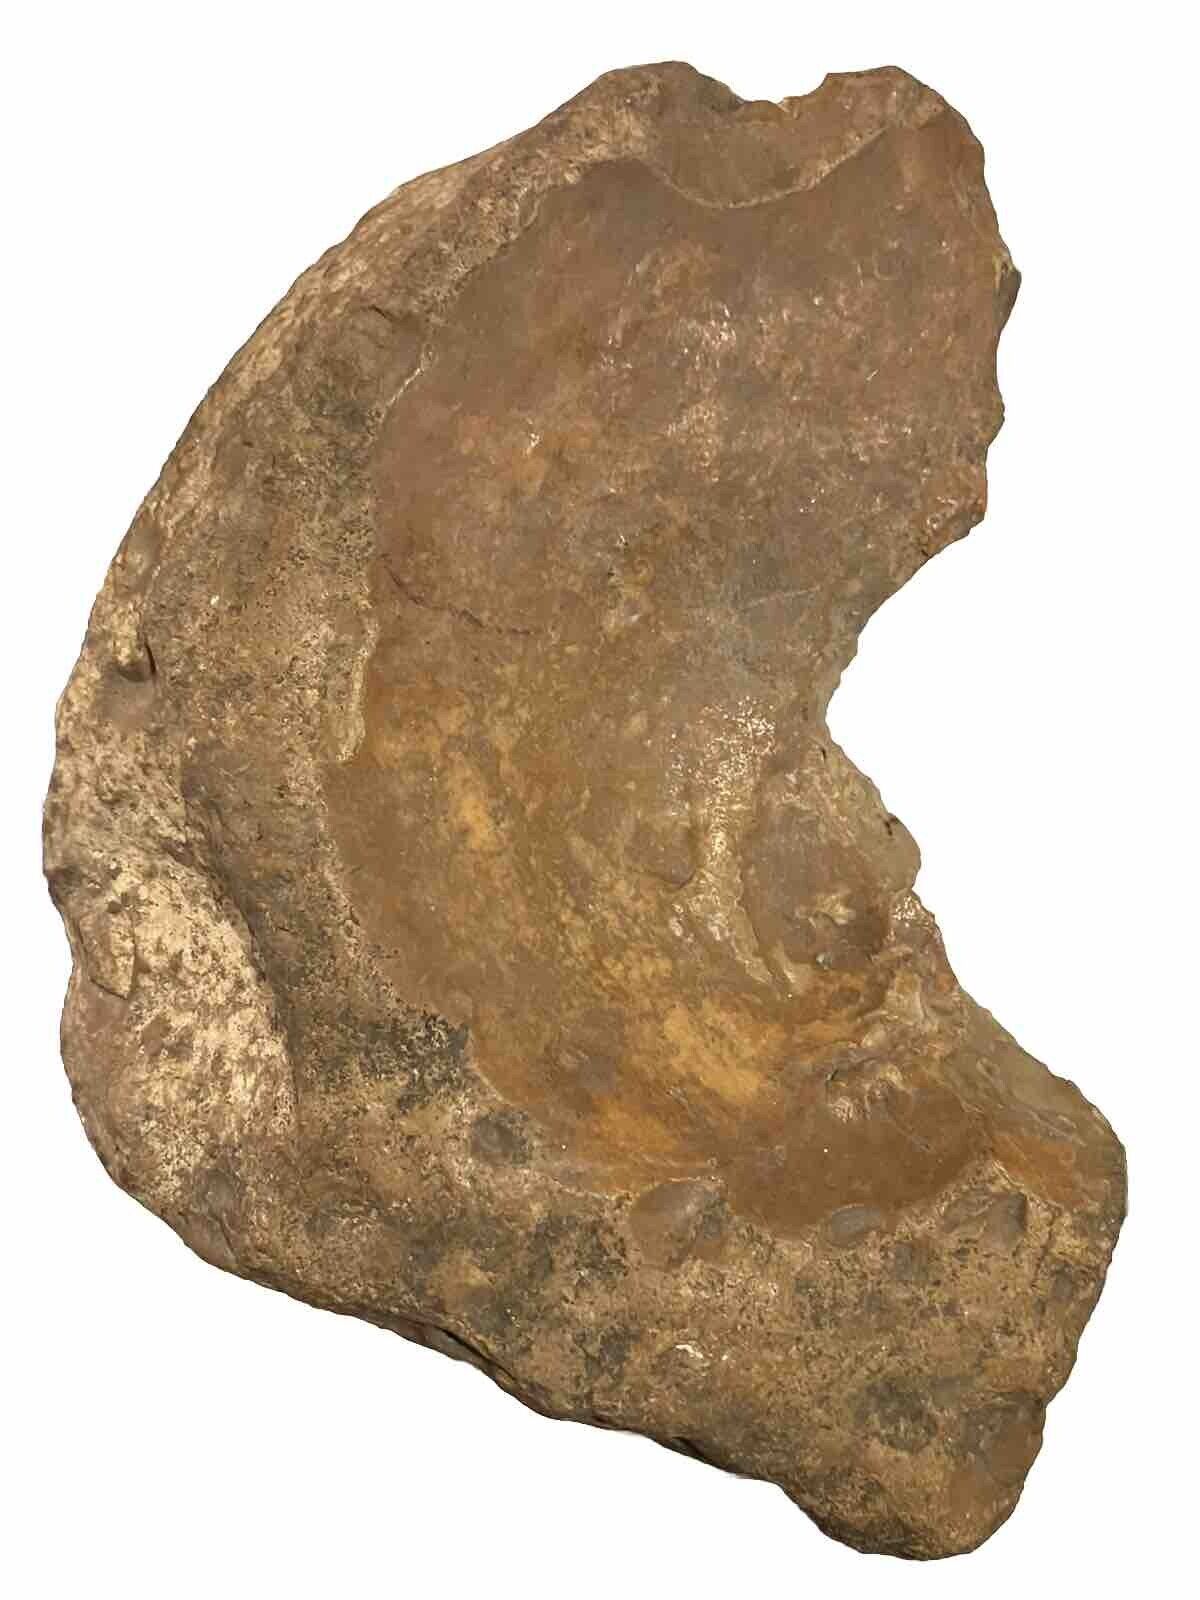 Large 7inch By 5 Inch PrehistoricNative AmericanFlint Axe Found In Central Texas